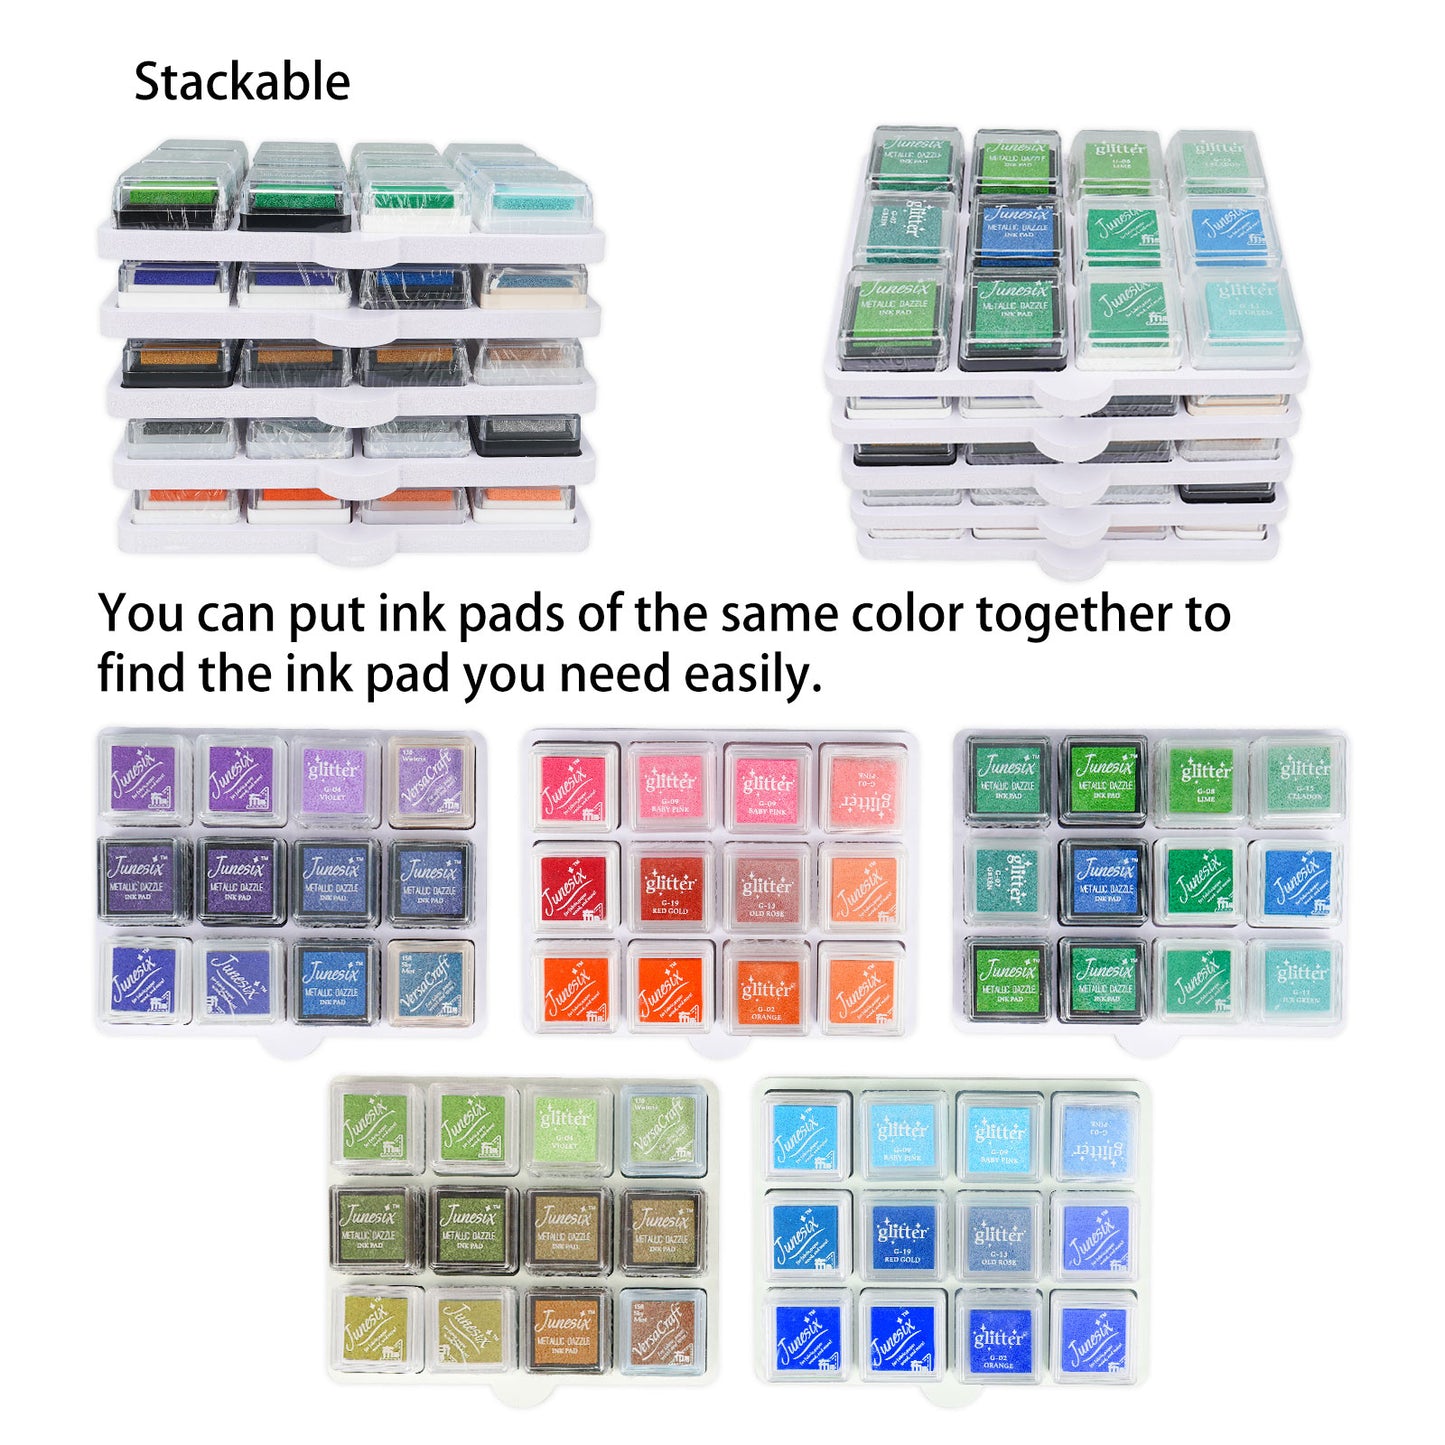 the mini cube ink pads can be stacked with each other